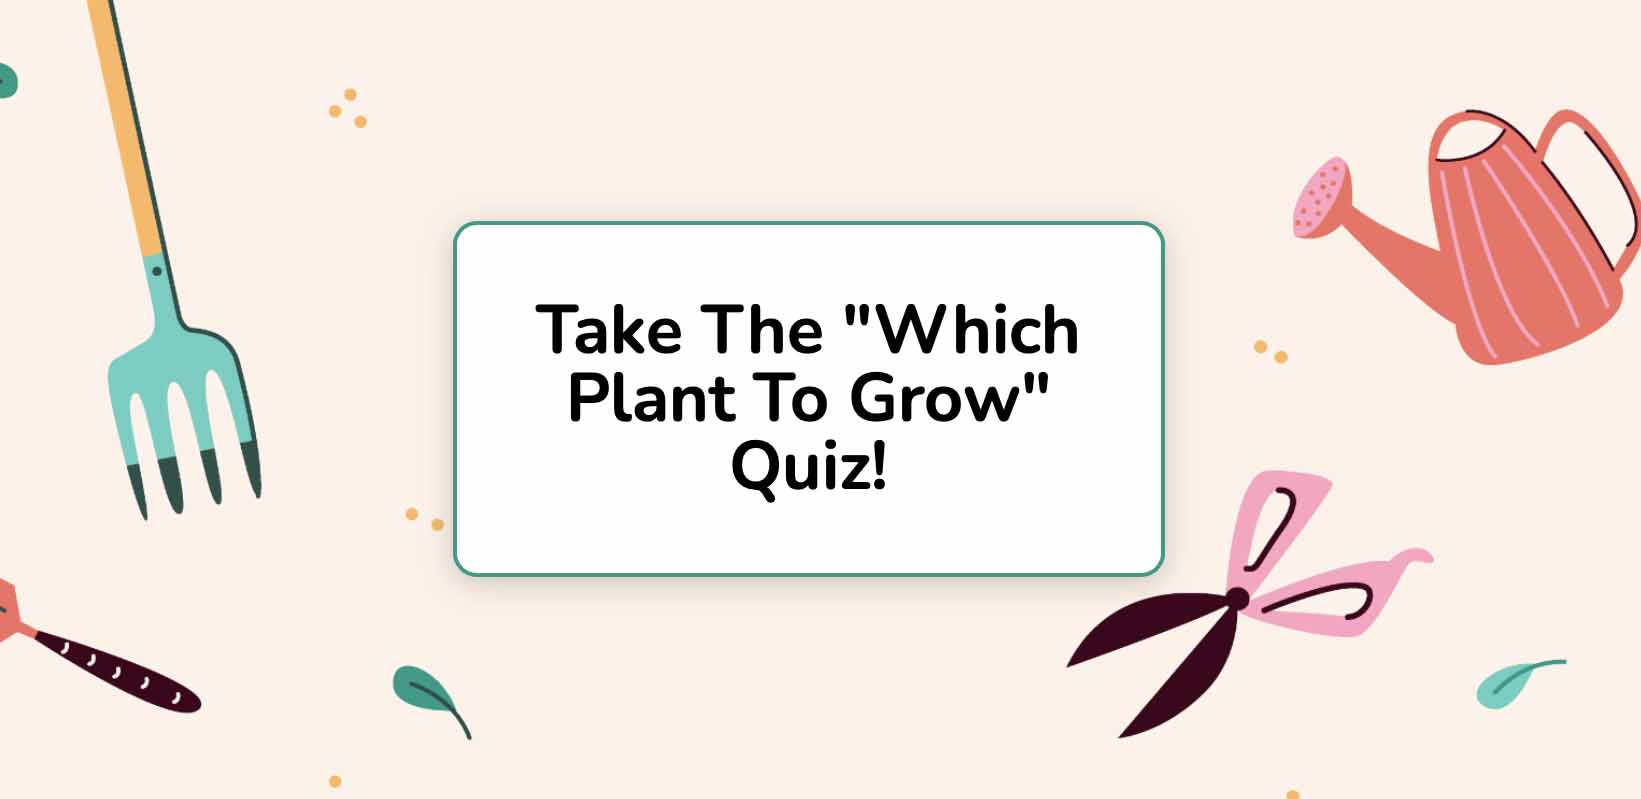 Which plant to grow quiz callout